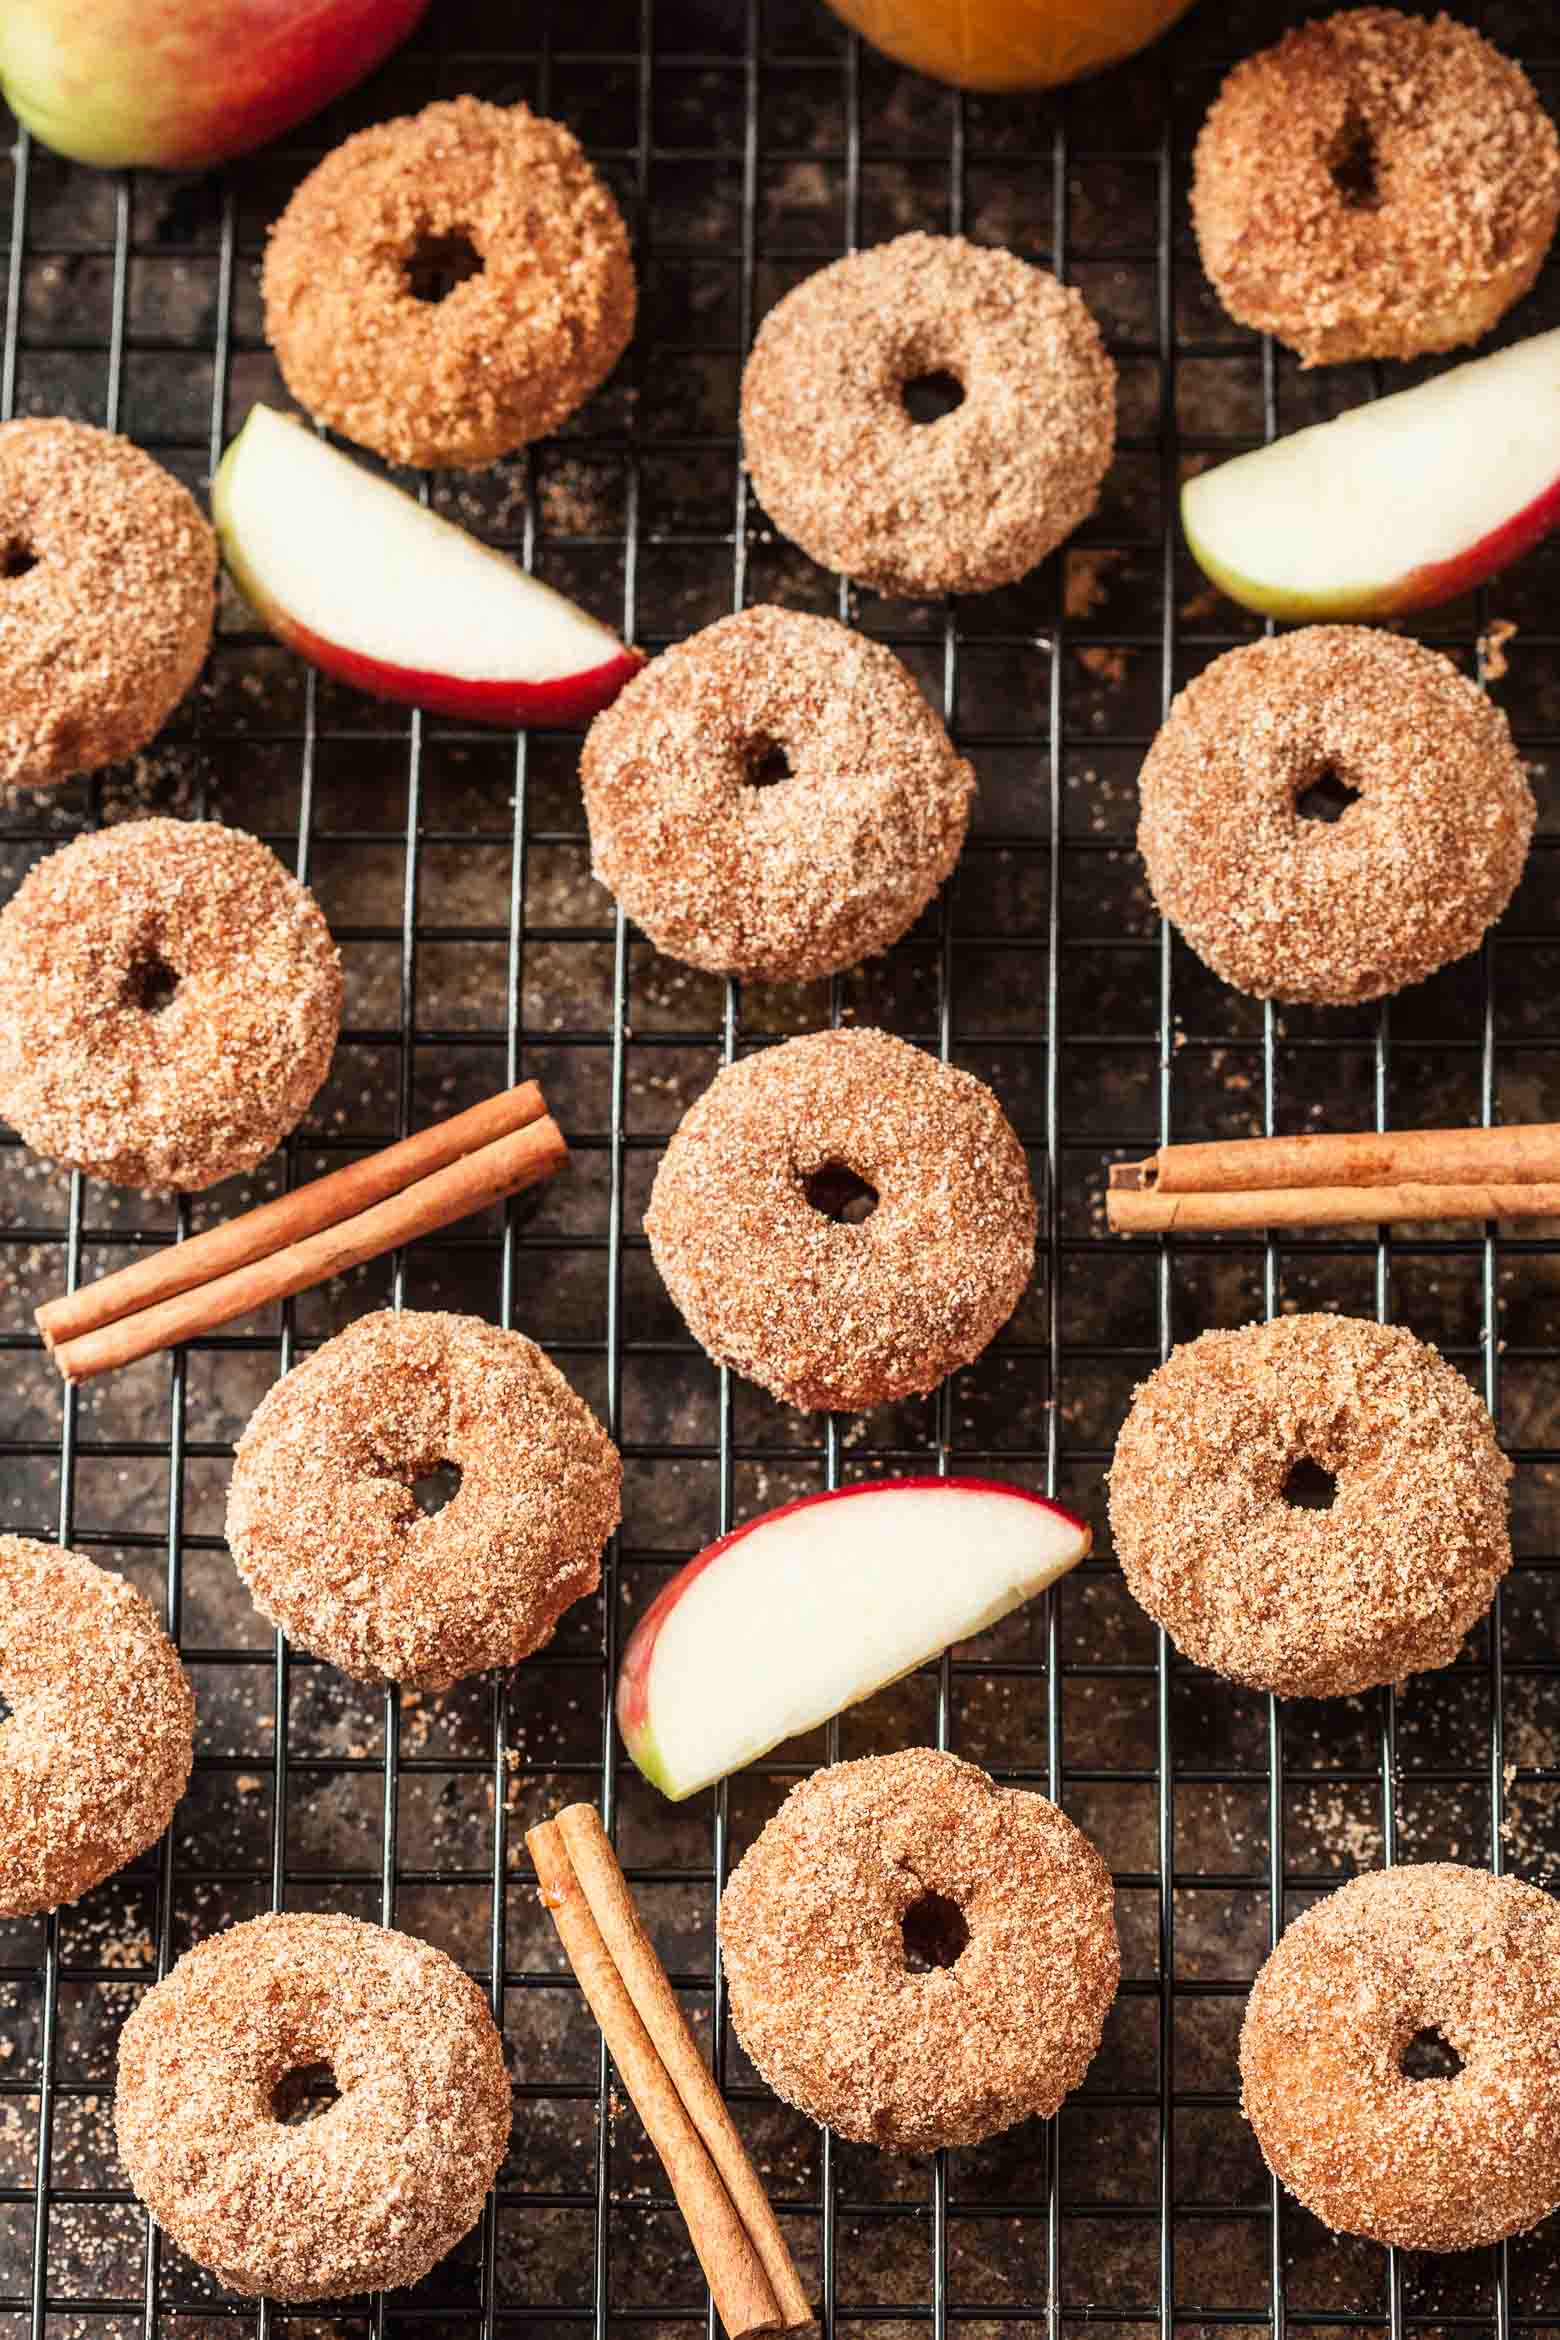 Bunch of donuts on a cooling rack with cinnamon sticks and apples in between.